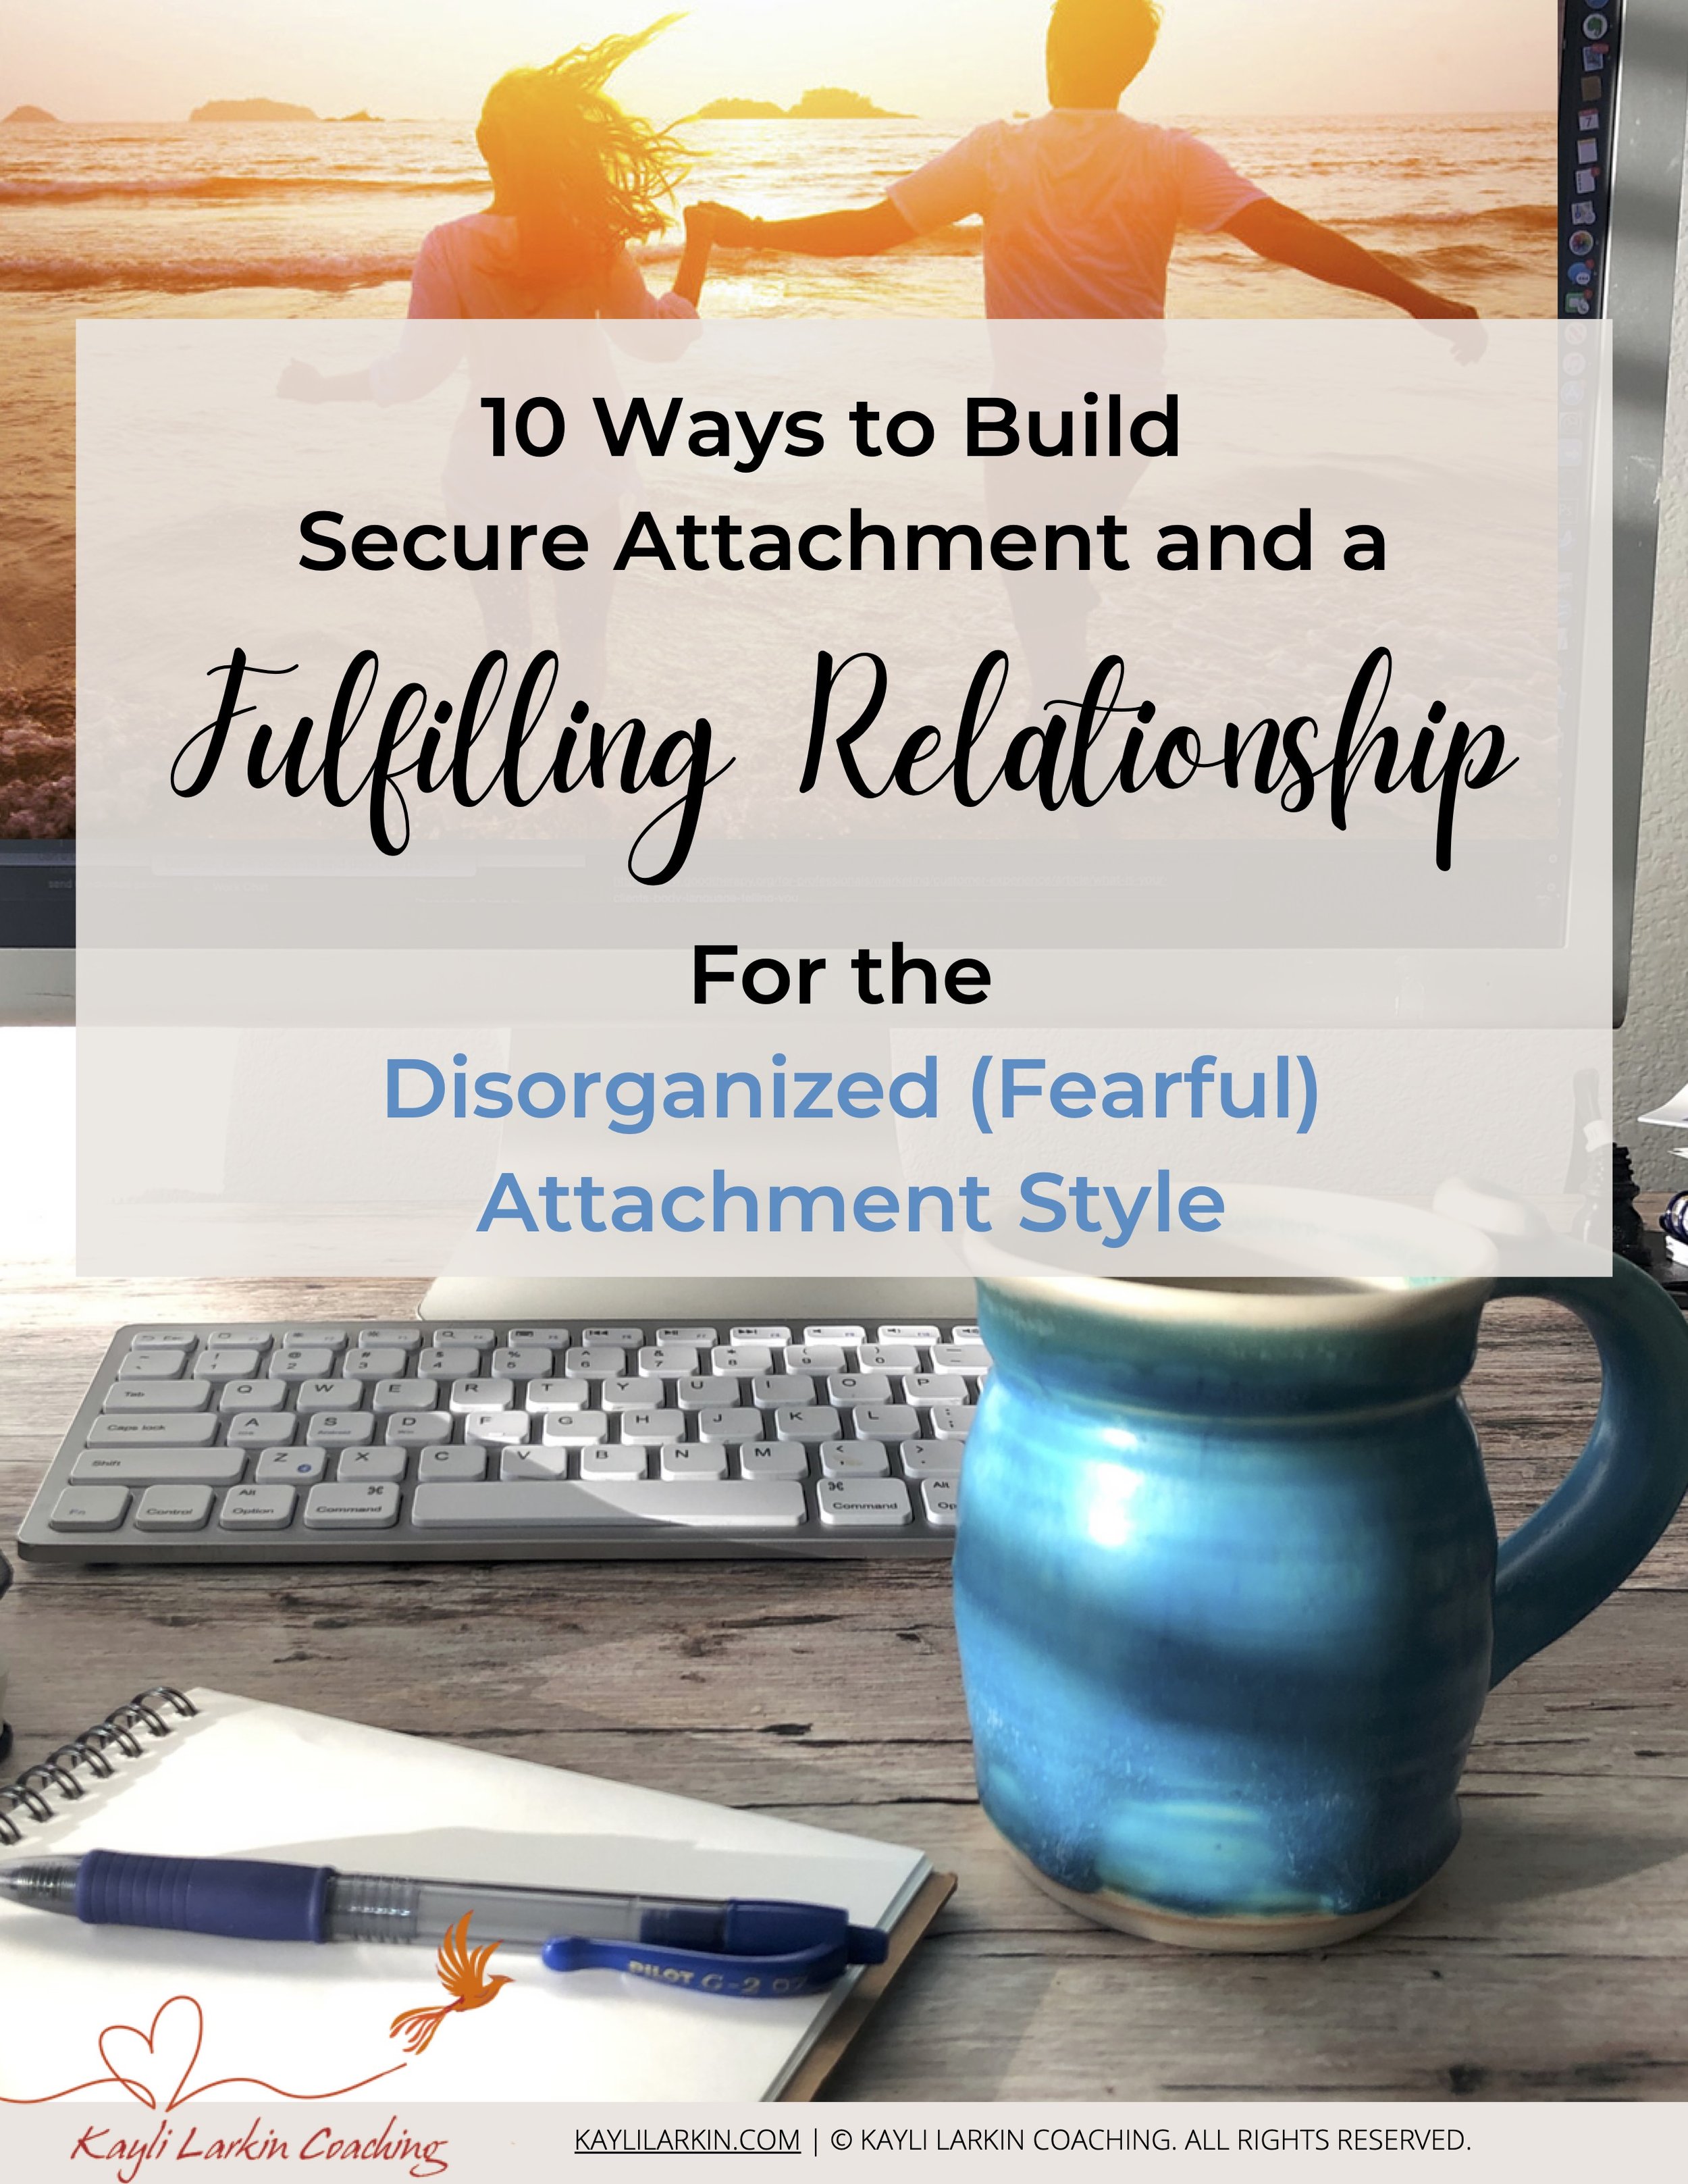 10 Steps To Secure Attachment - Disorganized Style.jpg